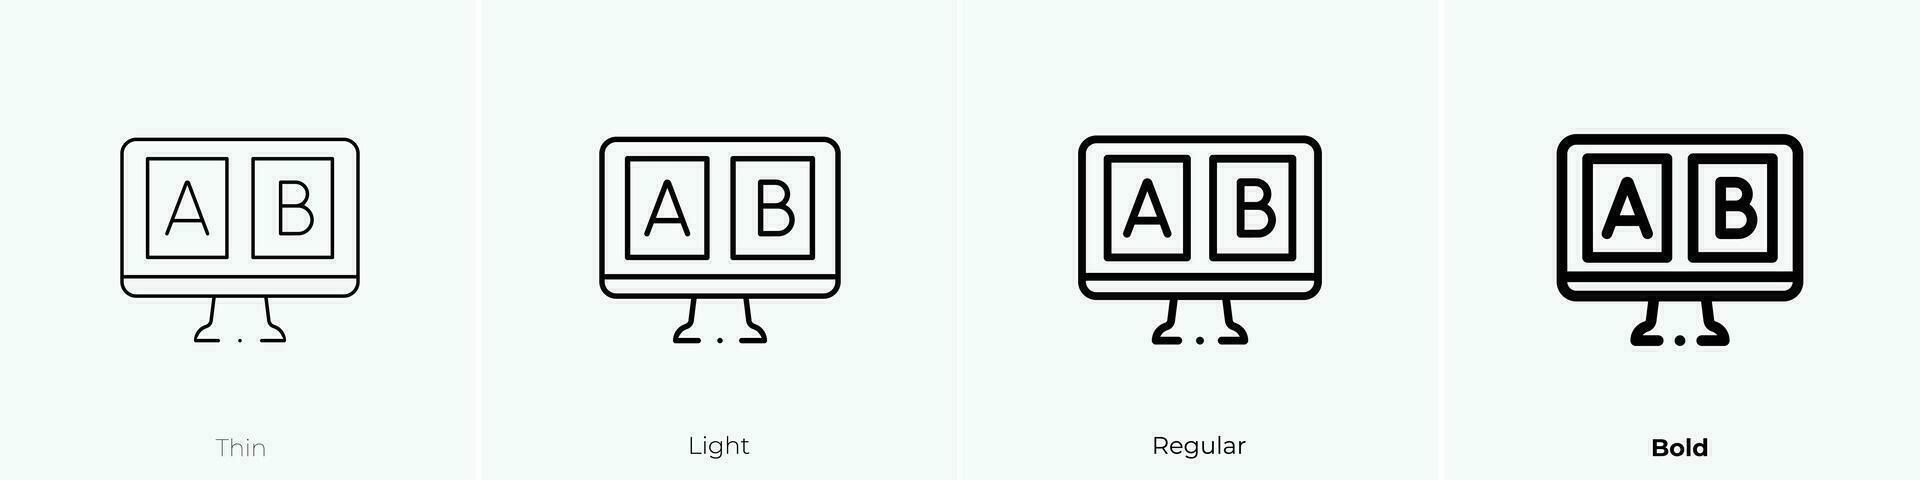 ab testing icon. Thin, Light, Regular And Bold style design isolated on white background vector